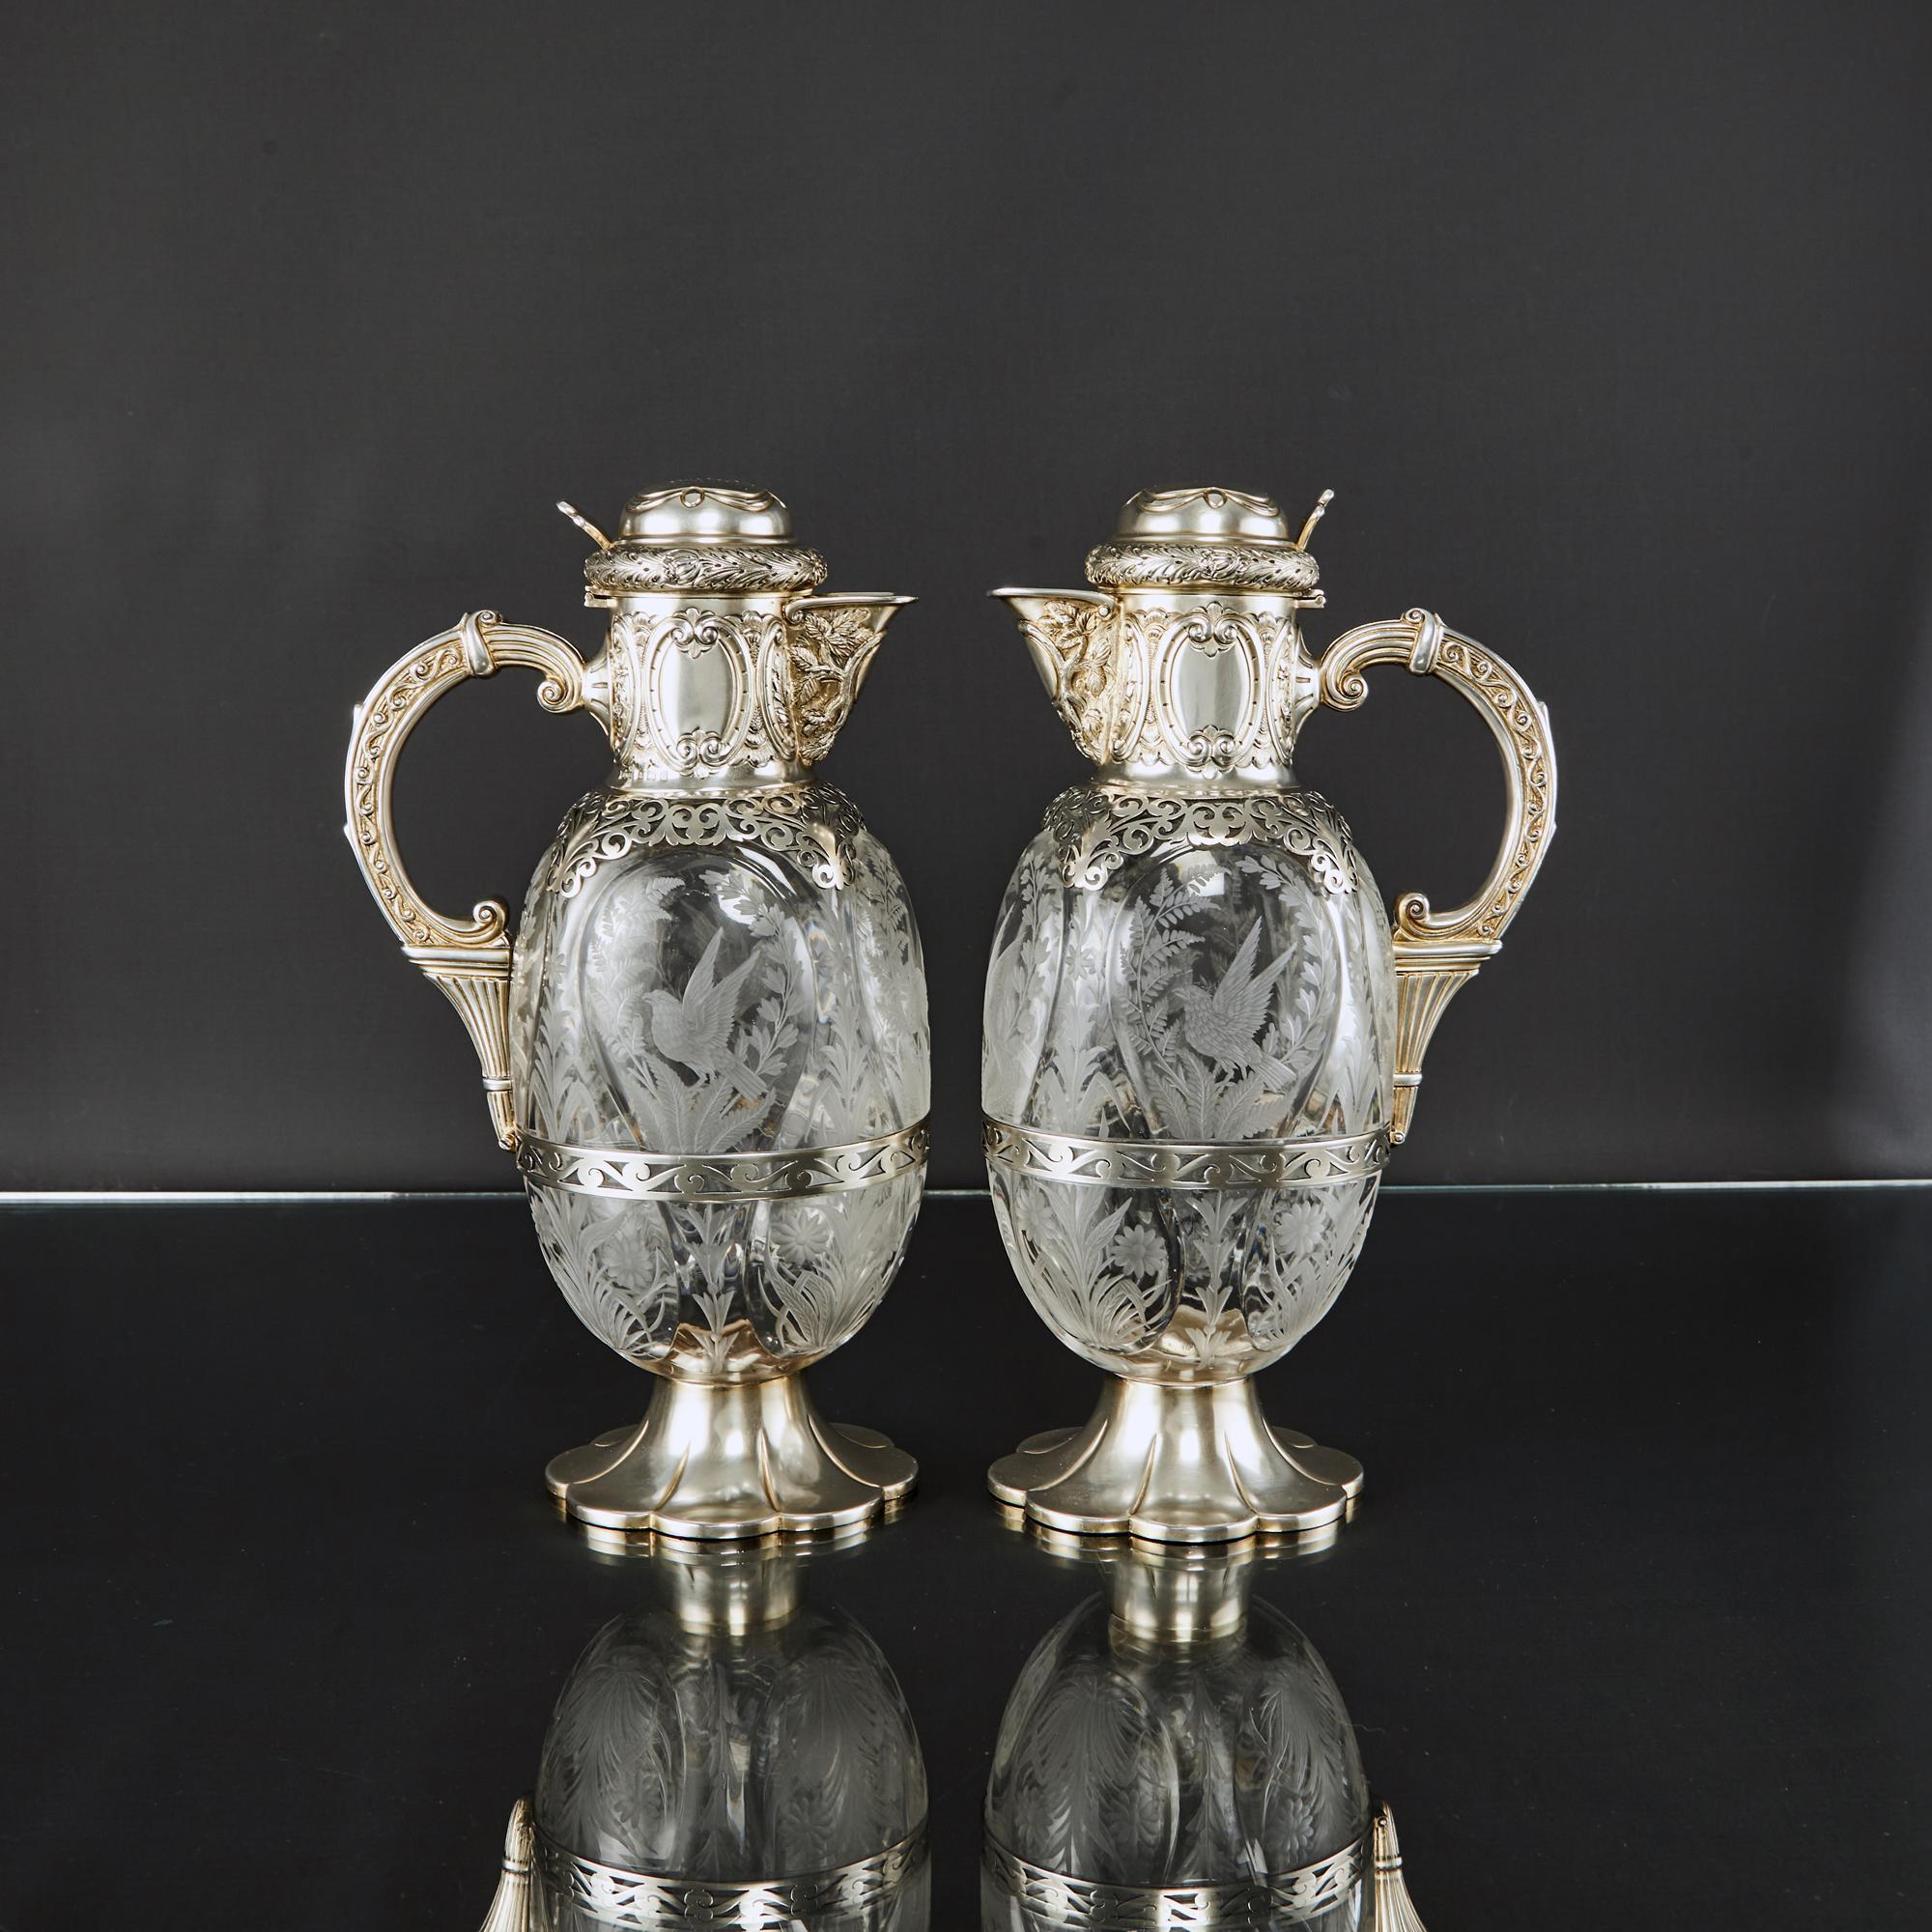 An excellent pair of antique Edwardian wine jugs of the finest quality. The ovoid glass bodies feature deeply cut panels, finely hand-engraved birds of prey surrounded by branches of bellflowers, ferns, foliage and flowers.

The silver mounts are